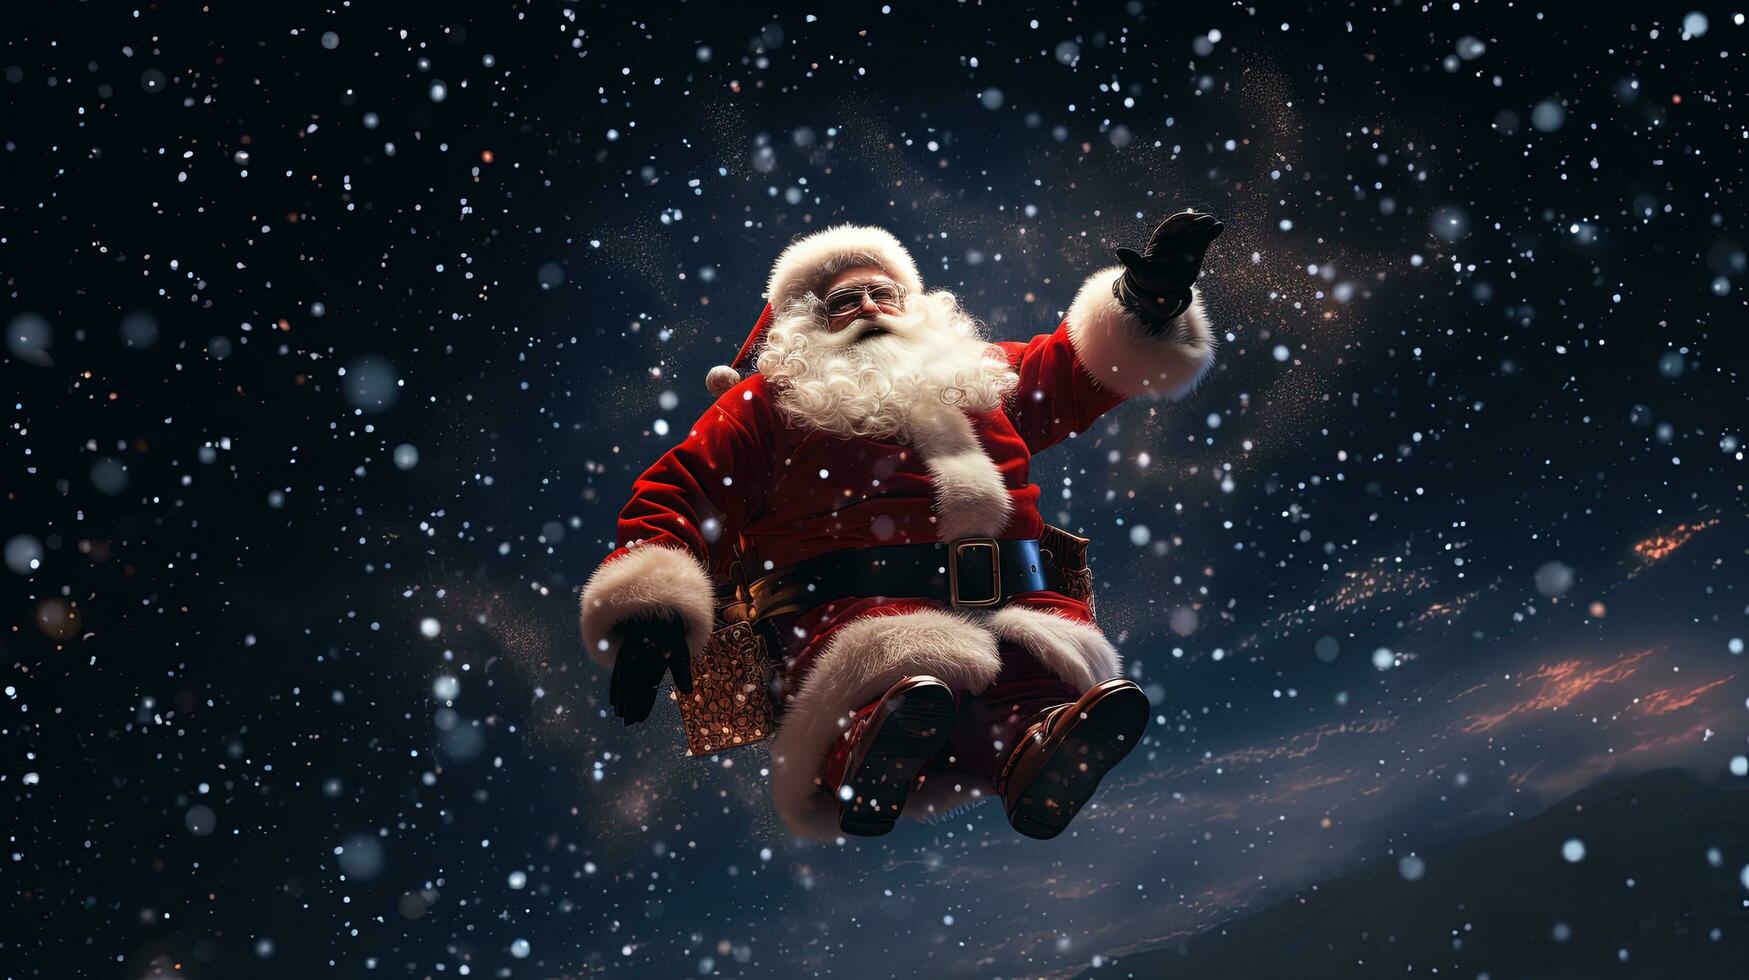 Santa Claus flies in the night sky on Christmas Eve with snow. silhouette concept photo